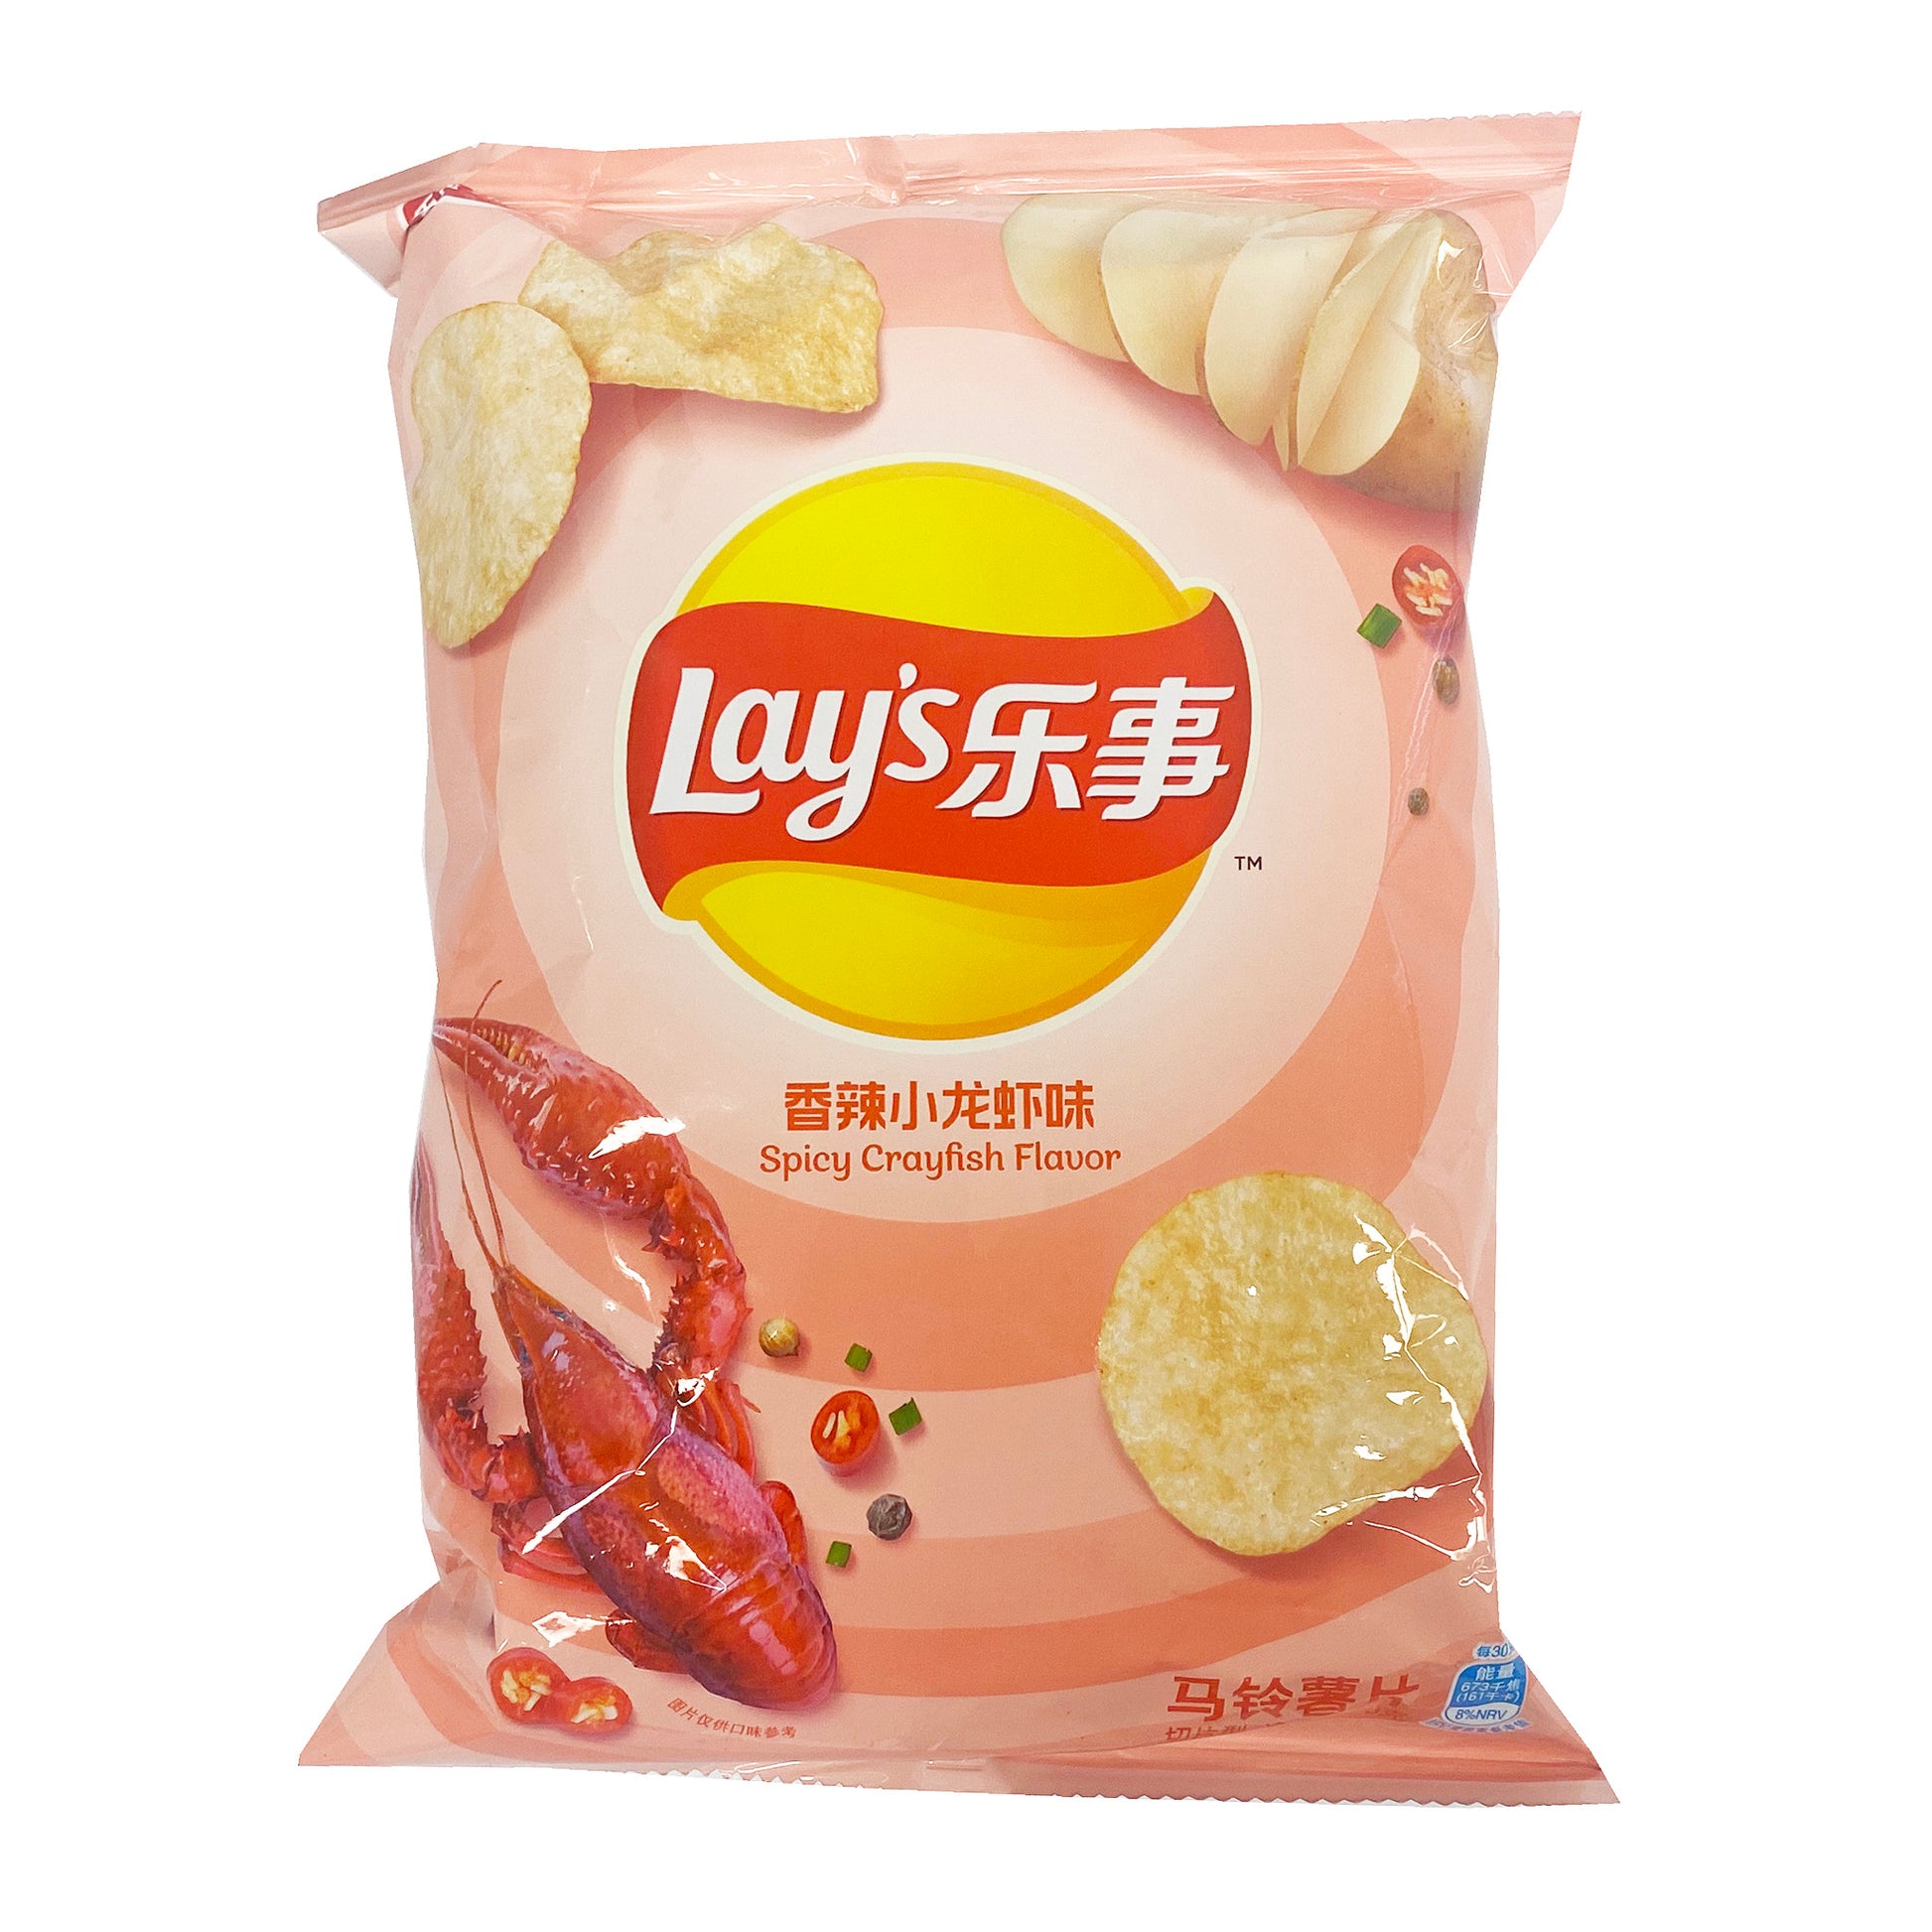 Front graphic image of Lay's Potato Chips - Spicy Crayfish Flavor 1.05oz